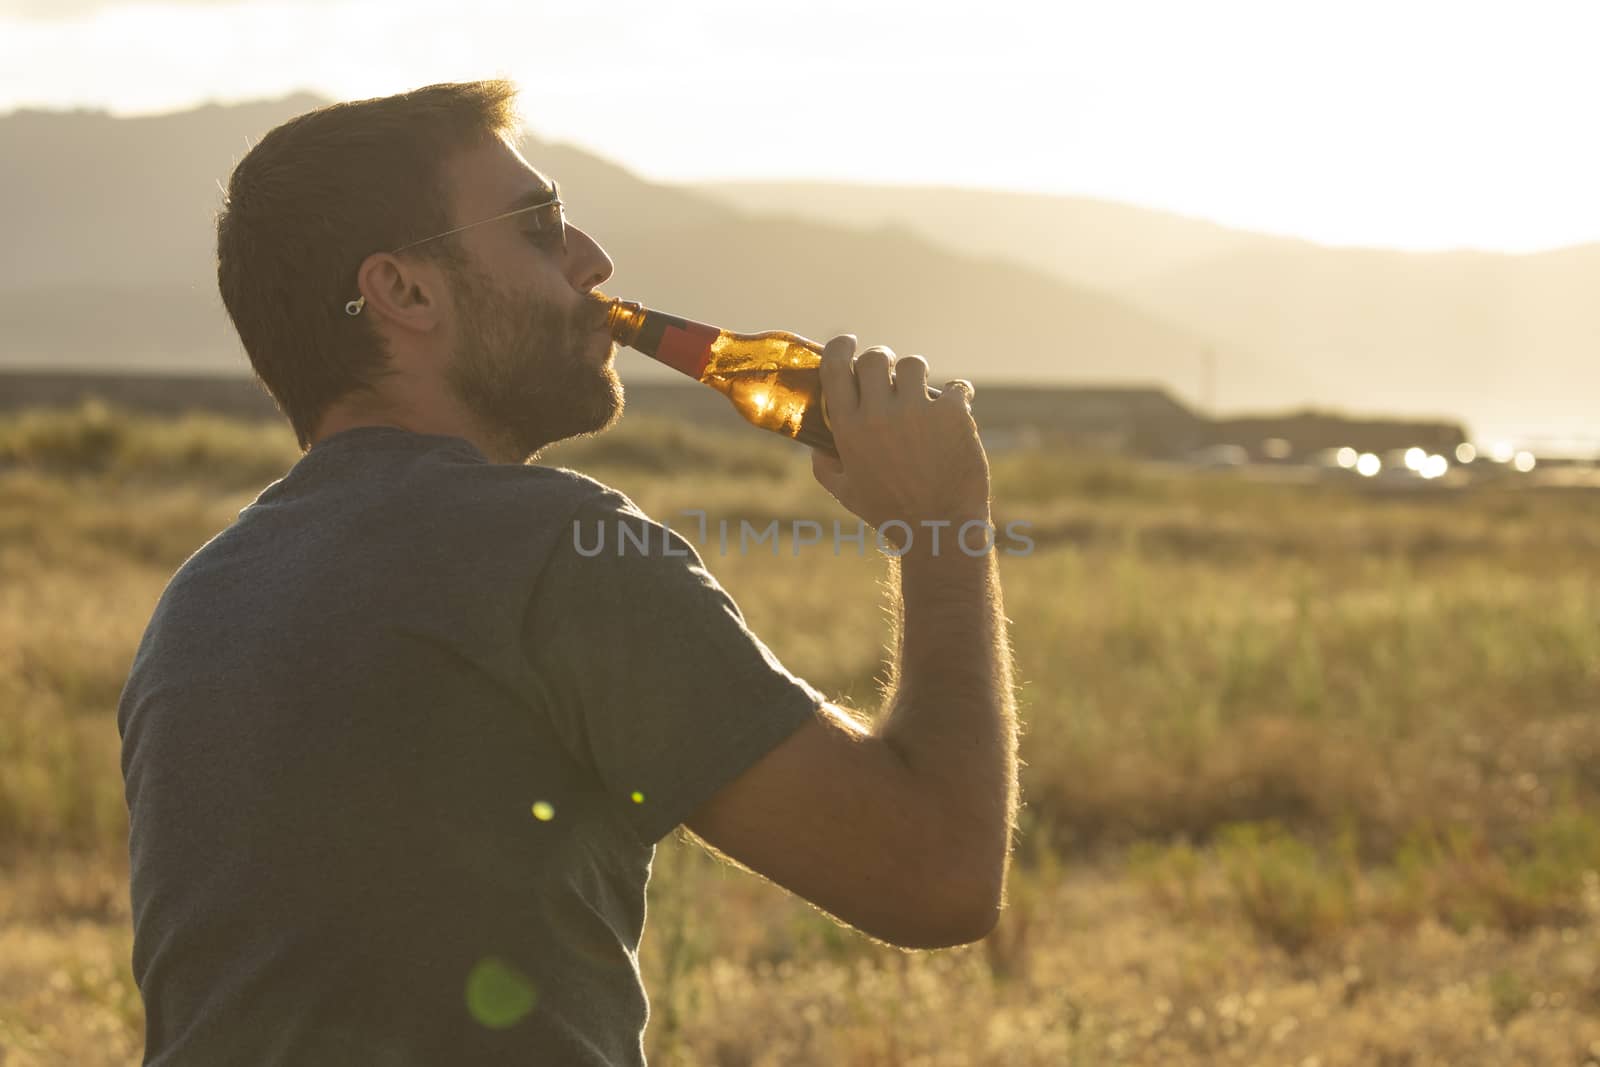 A young man drinks beer from a bottle at sunset, Spain by alvarobueno